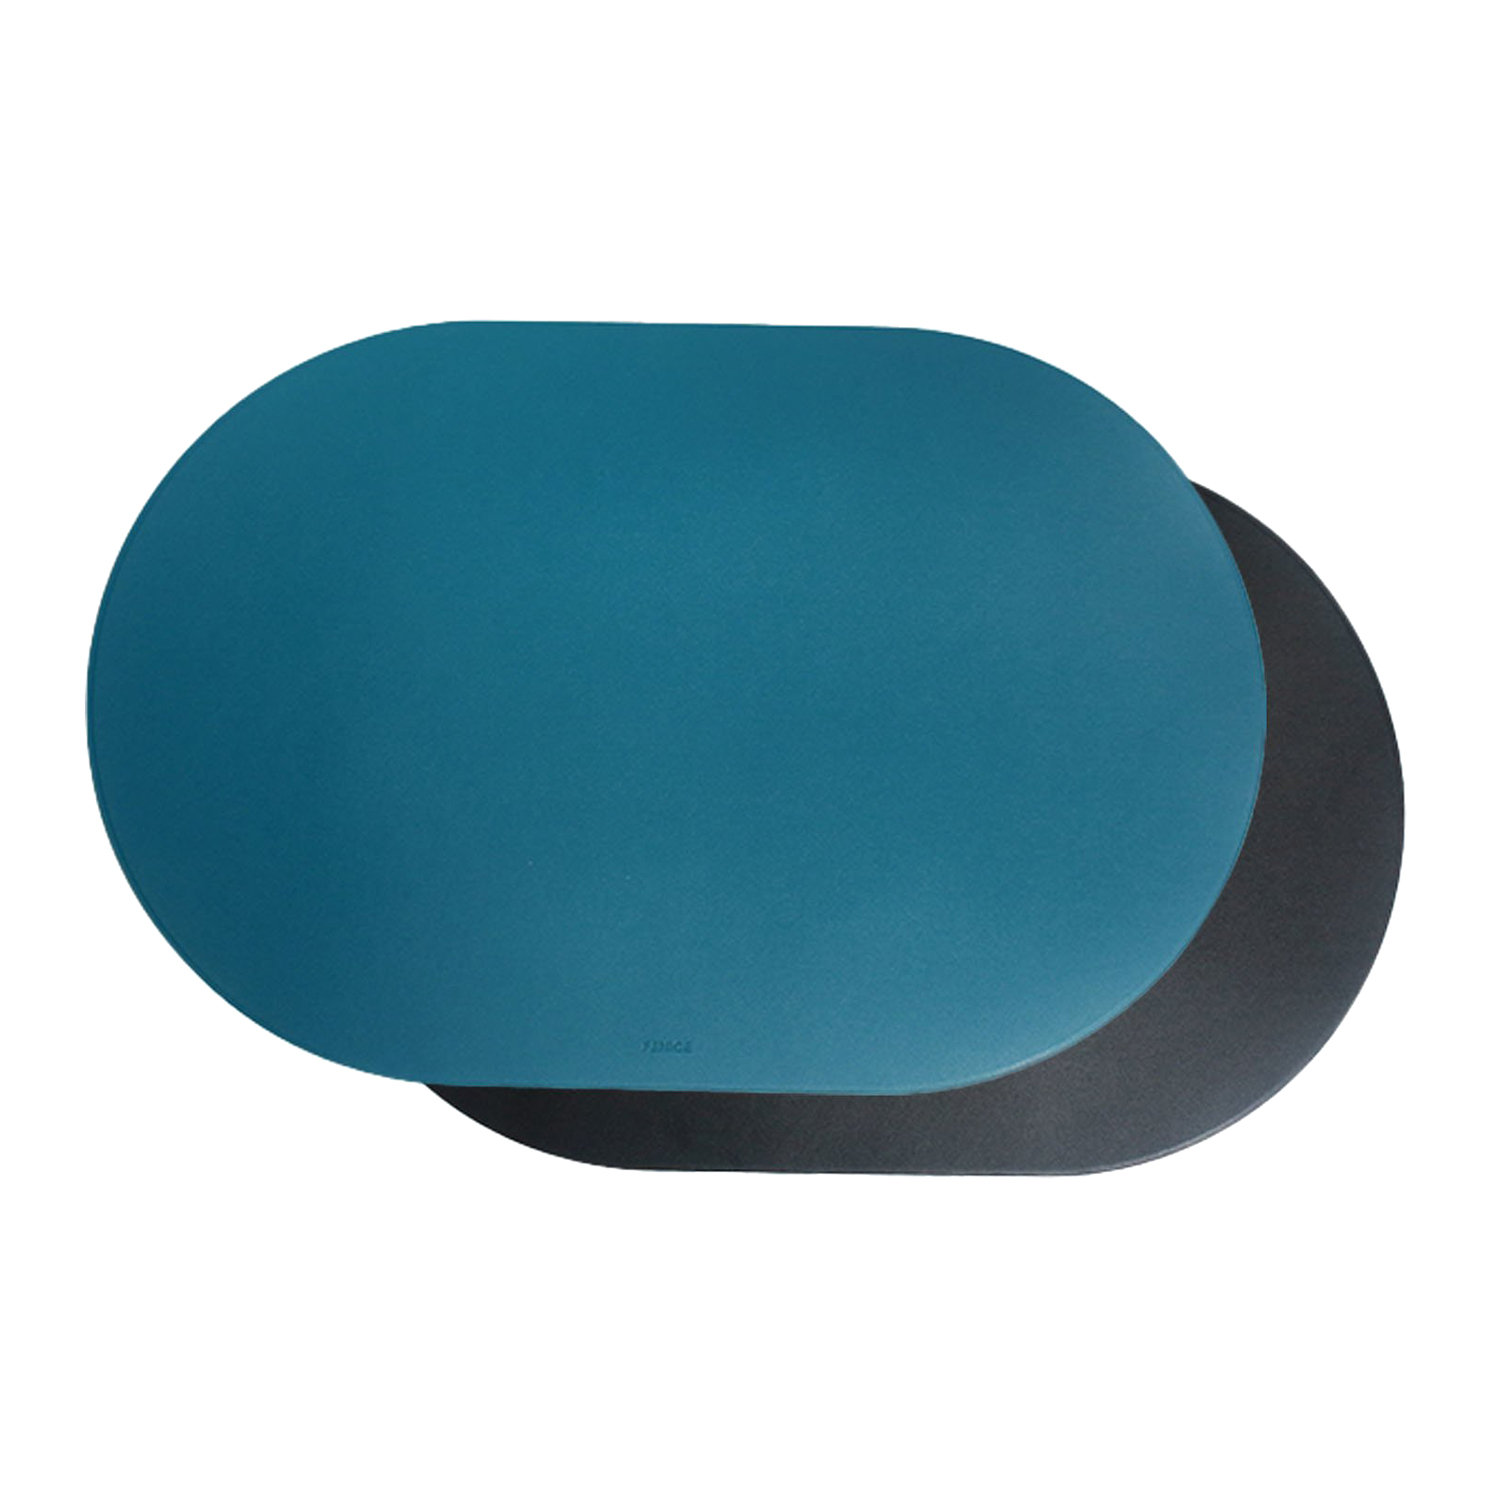 TWO TONE TABLE MAT OVAL SHAPE (4 COLORS)